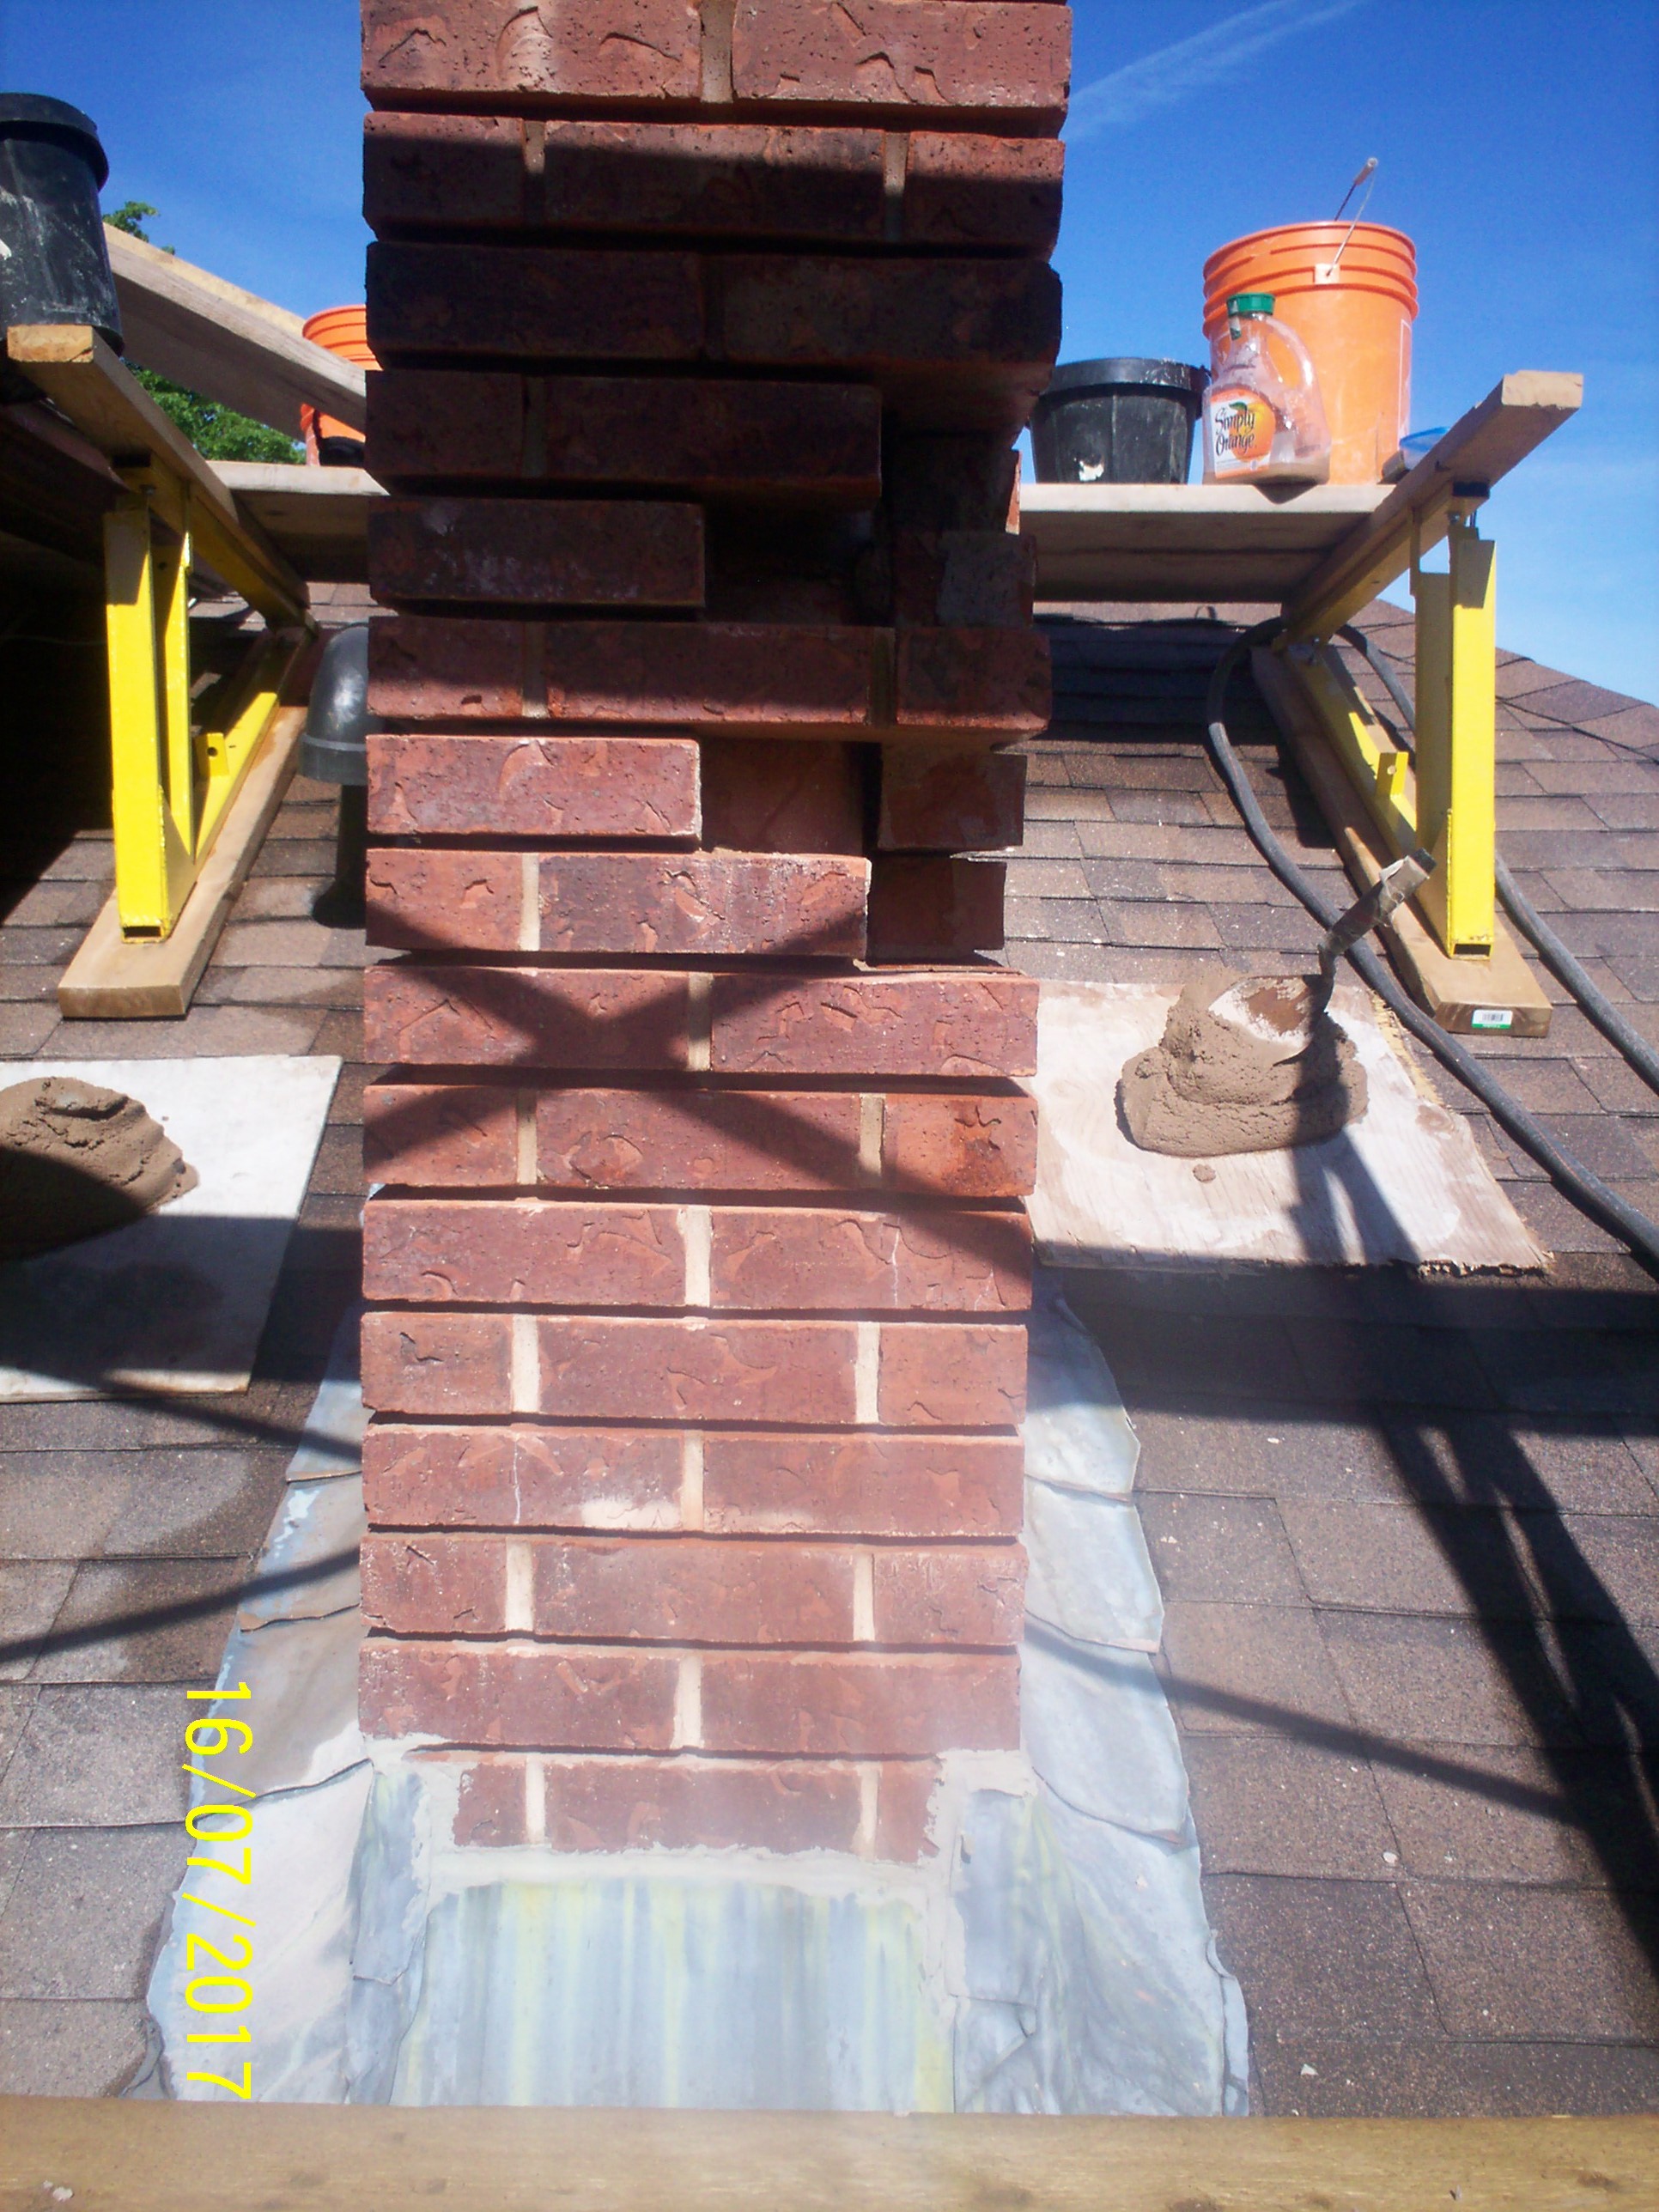 image of chimney-chimney repair services completed in Halifax-Dartmouth Regional Municipality, NS by Pro Chimney Services based in Halifax NS servicing all of the Halifax-Dartmouth Regional Municipality, Bedford, Sackville, Mount Uniacke, Windsor, Hantsport , Wolfville, Kentville, Chester, Mahone Bay, Lunenburg, Bridgewater, Liverpool, Fall River, Wellington, Enfield, Elmsdale, Brookfield, Truro, Musquodoboit Harbour & surrounding areas.